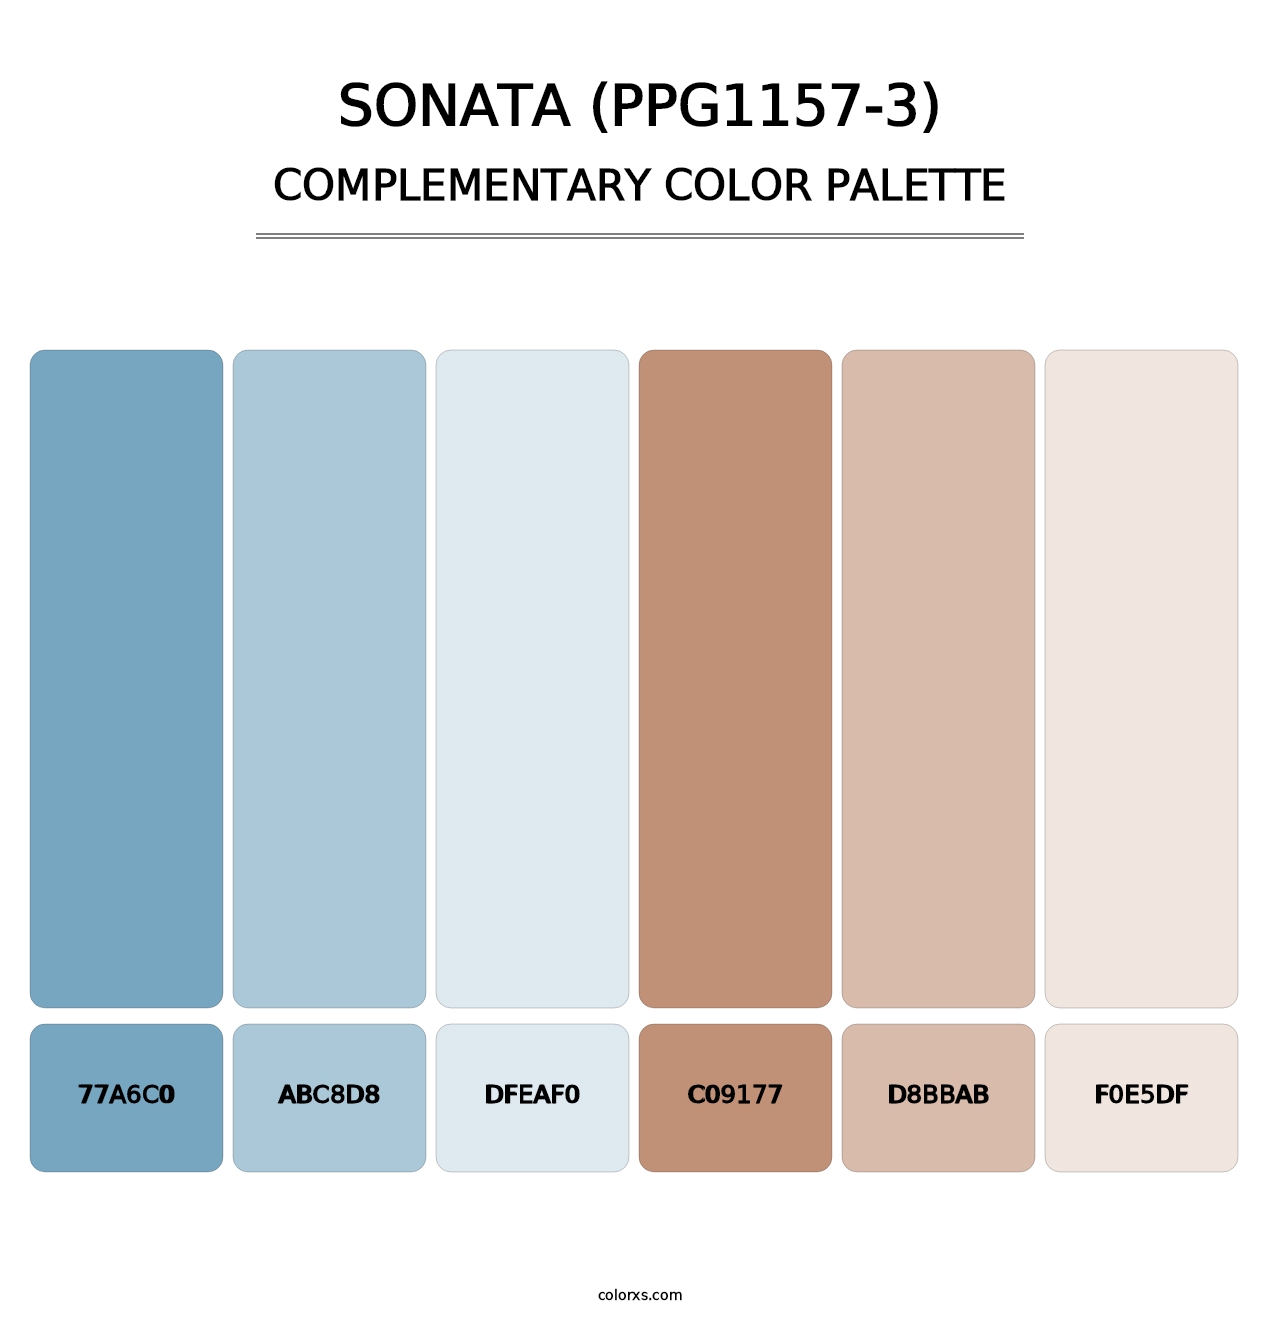 Sonata (PPG1157-3) - Complementary Color Palette